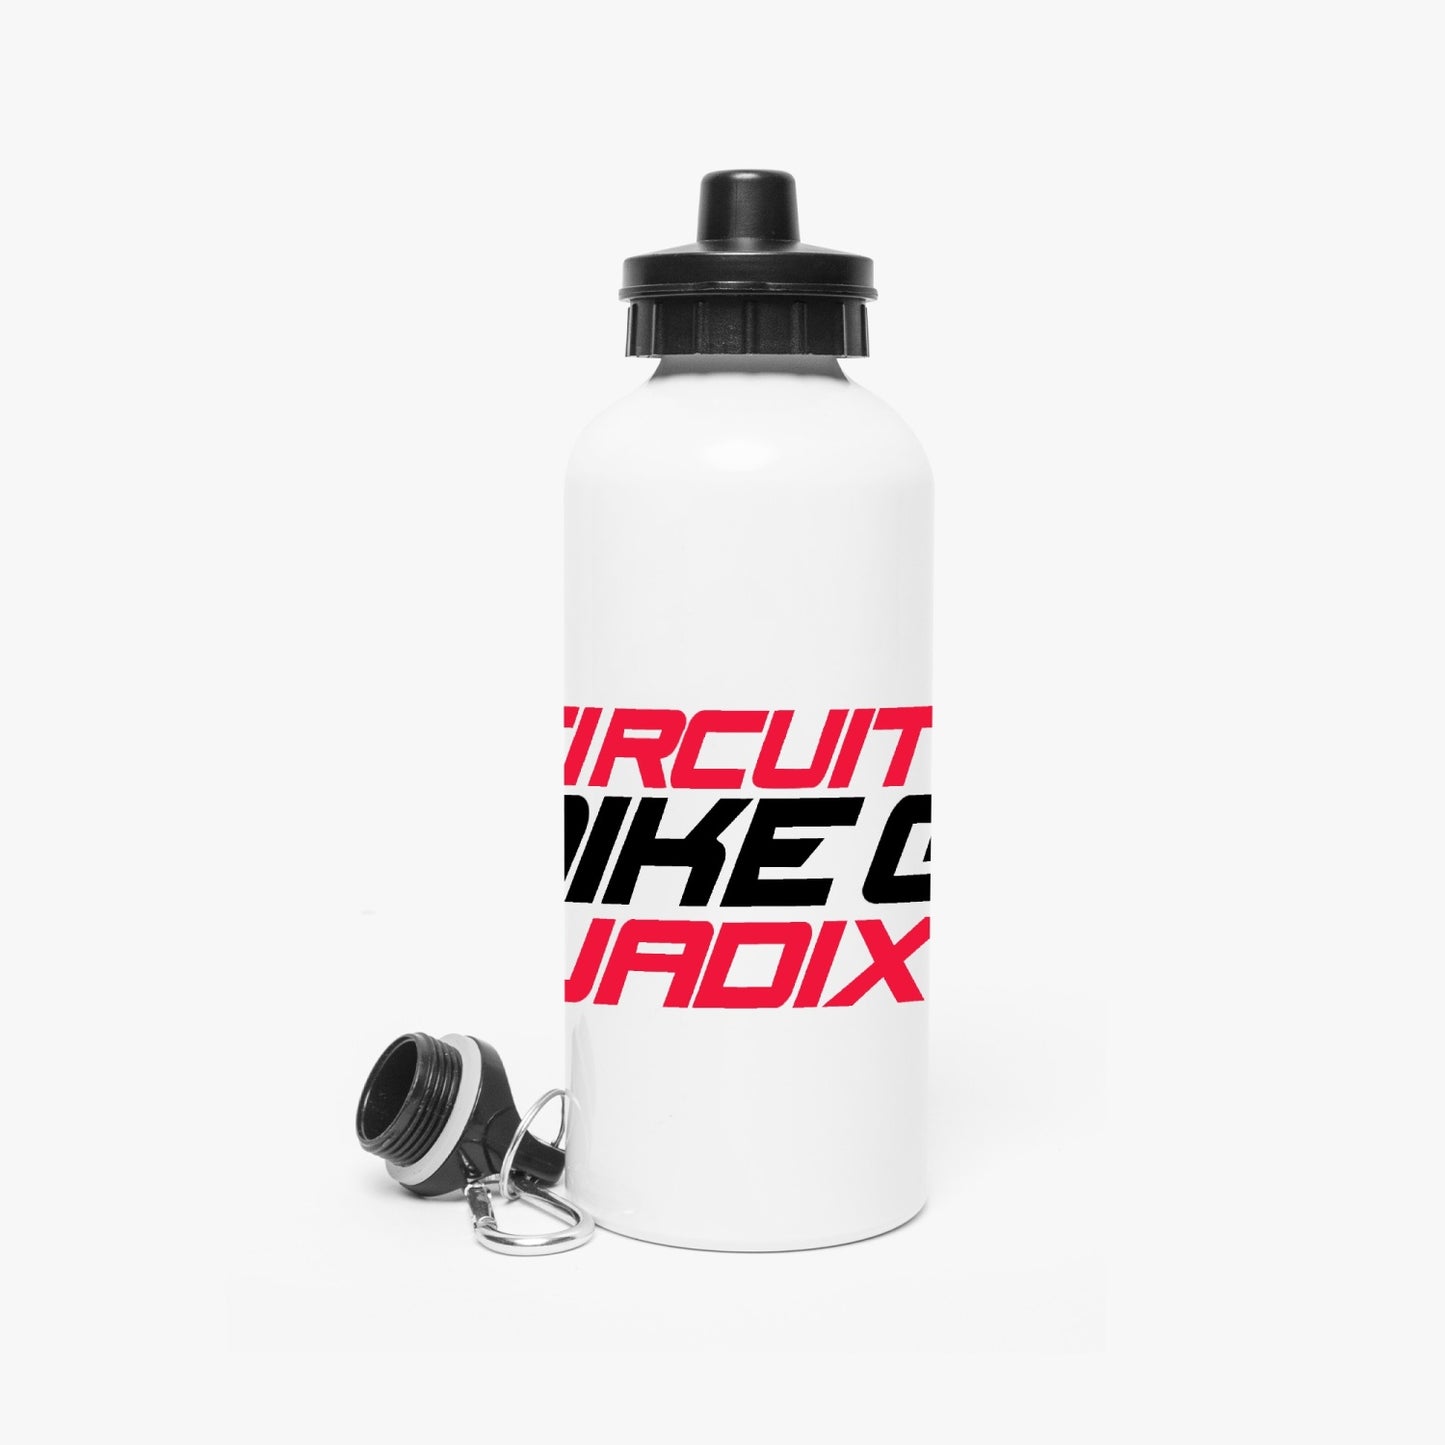 CIRCUITO MIKE G GUADIX Stainless Steel drink bottle